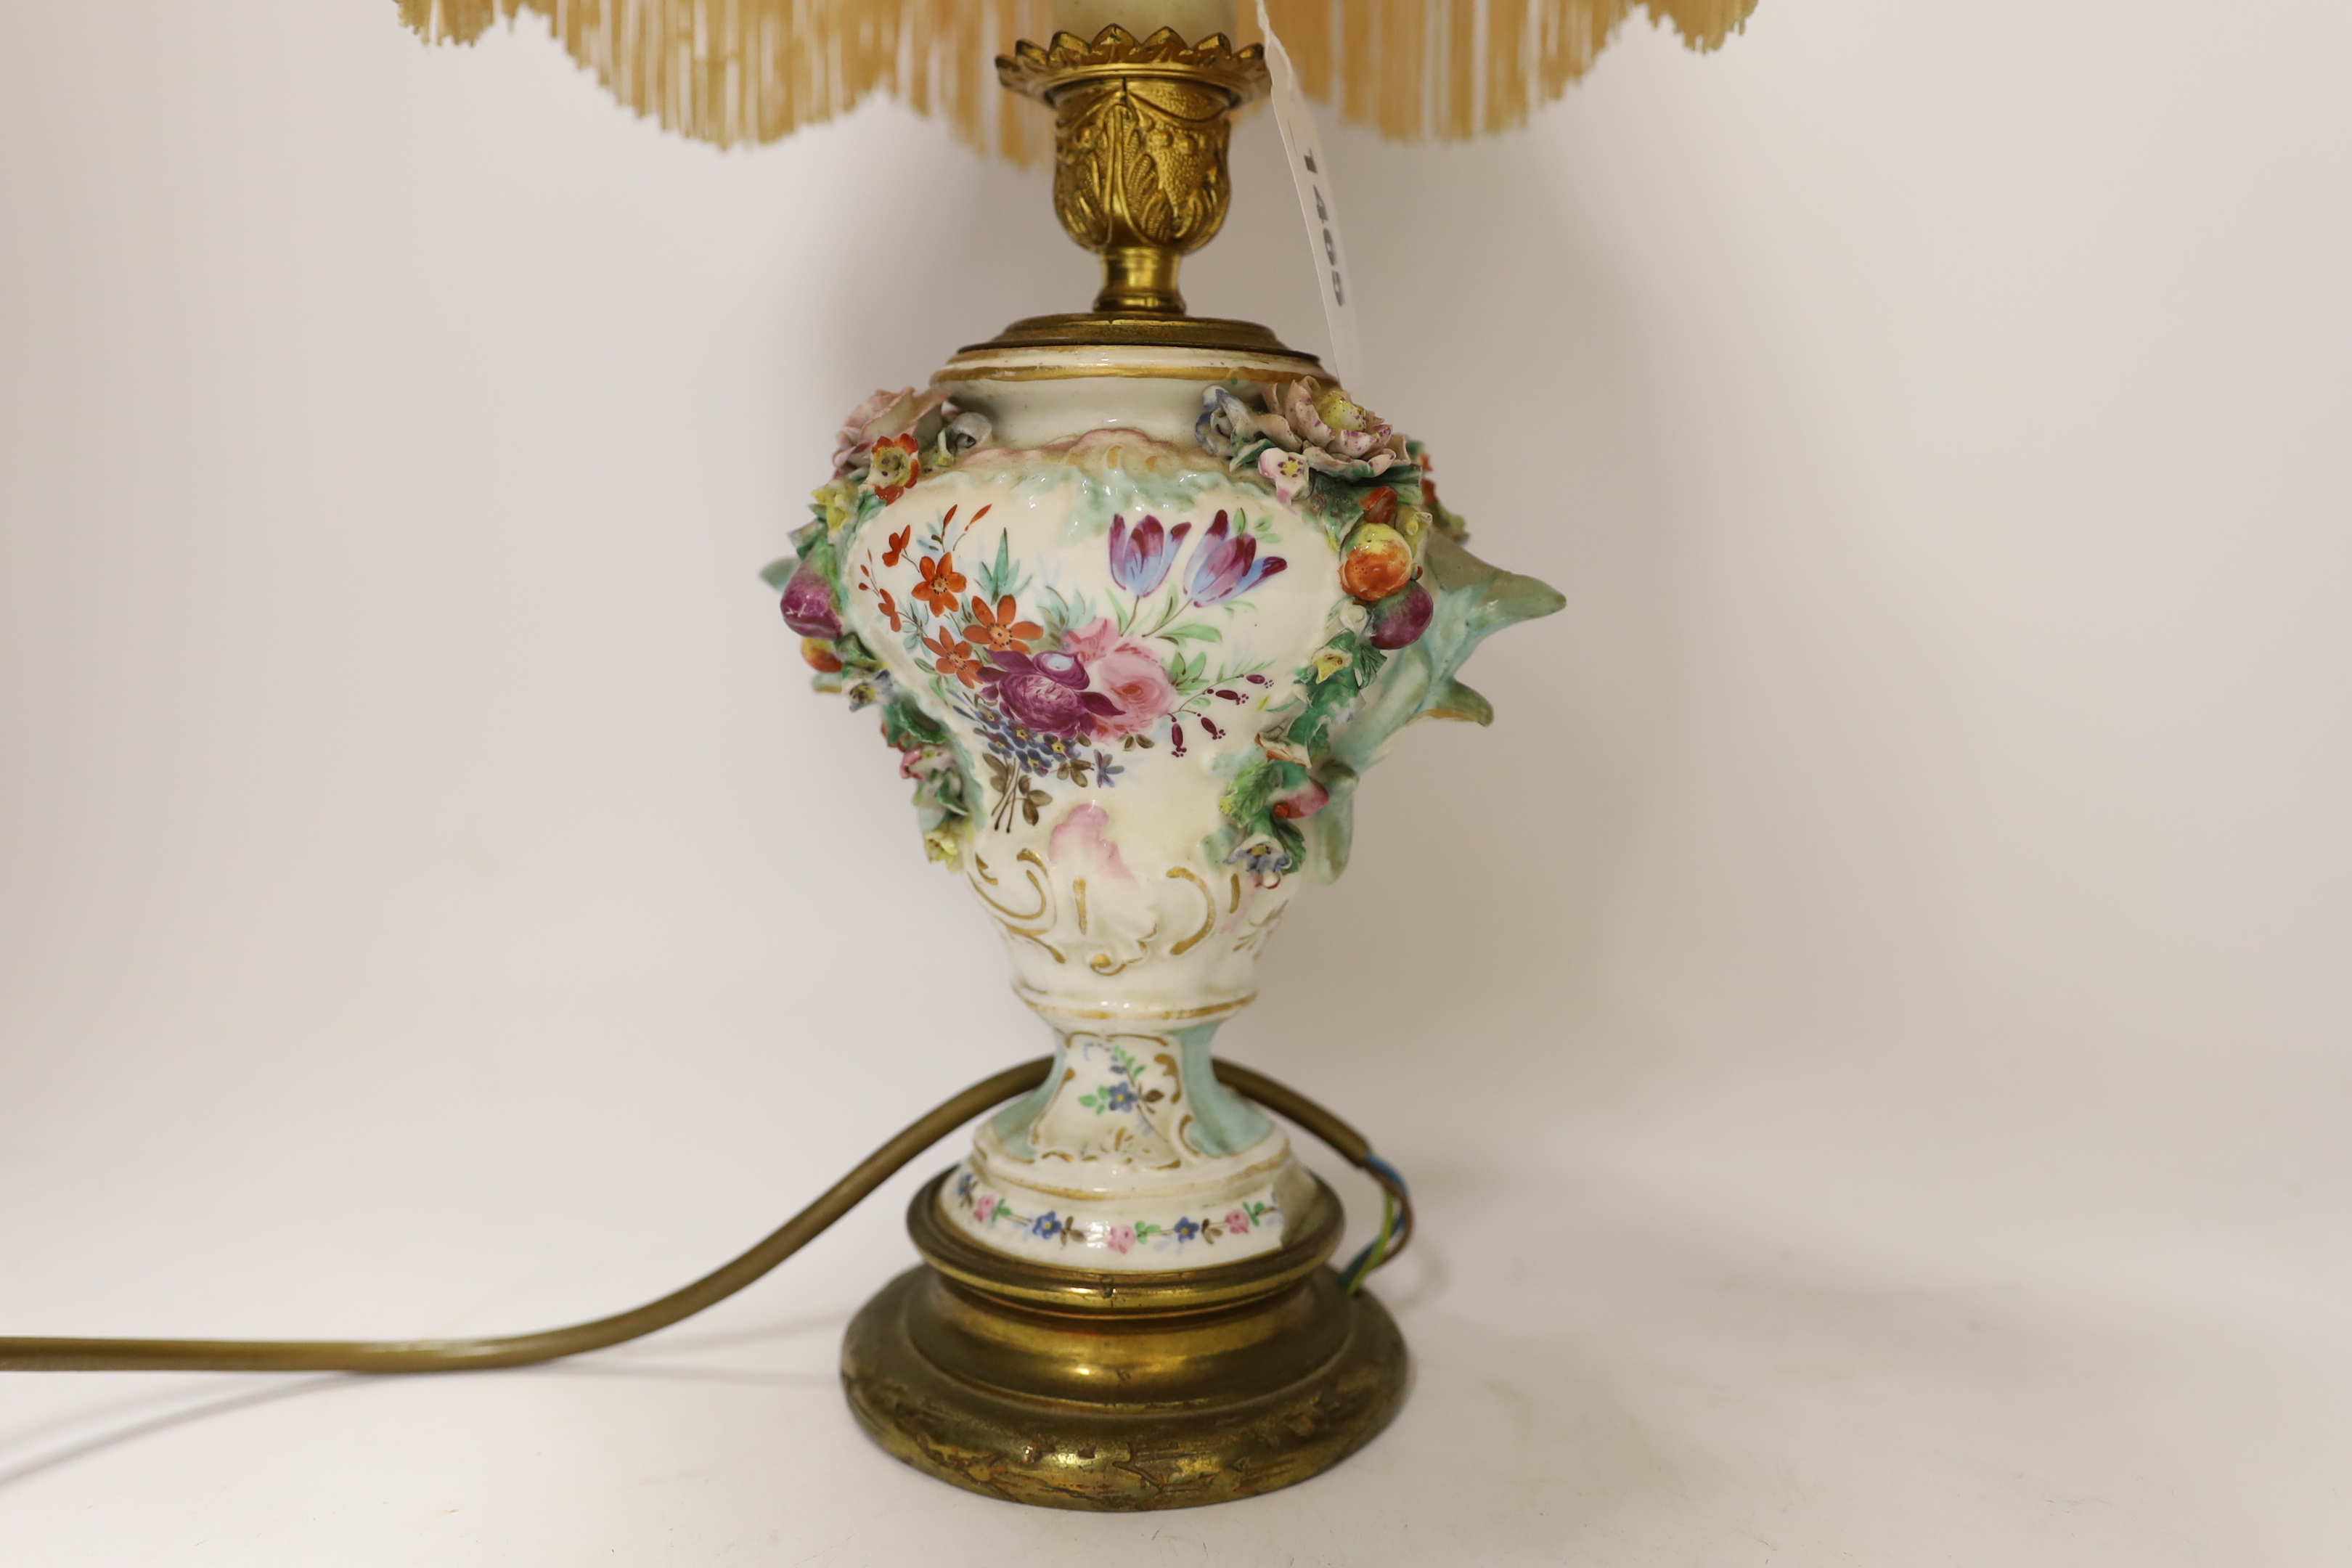 A 19th century floral encrusted table lamp with silk shade, 47cm high